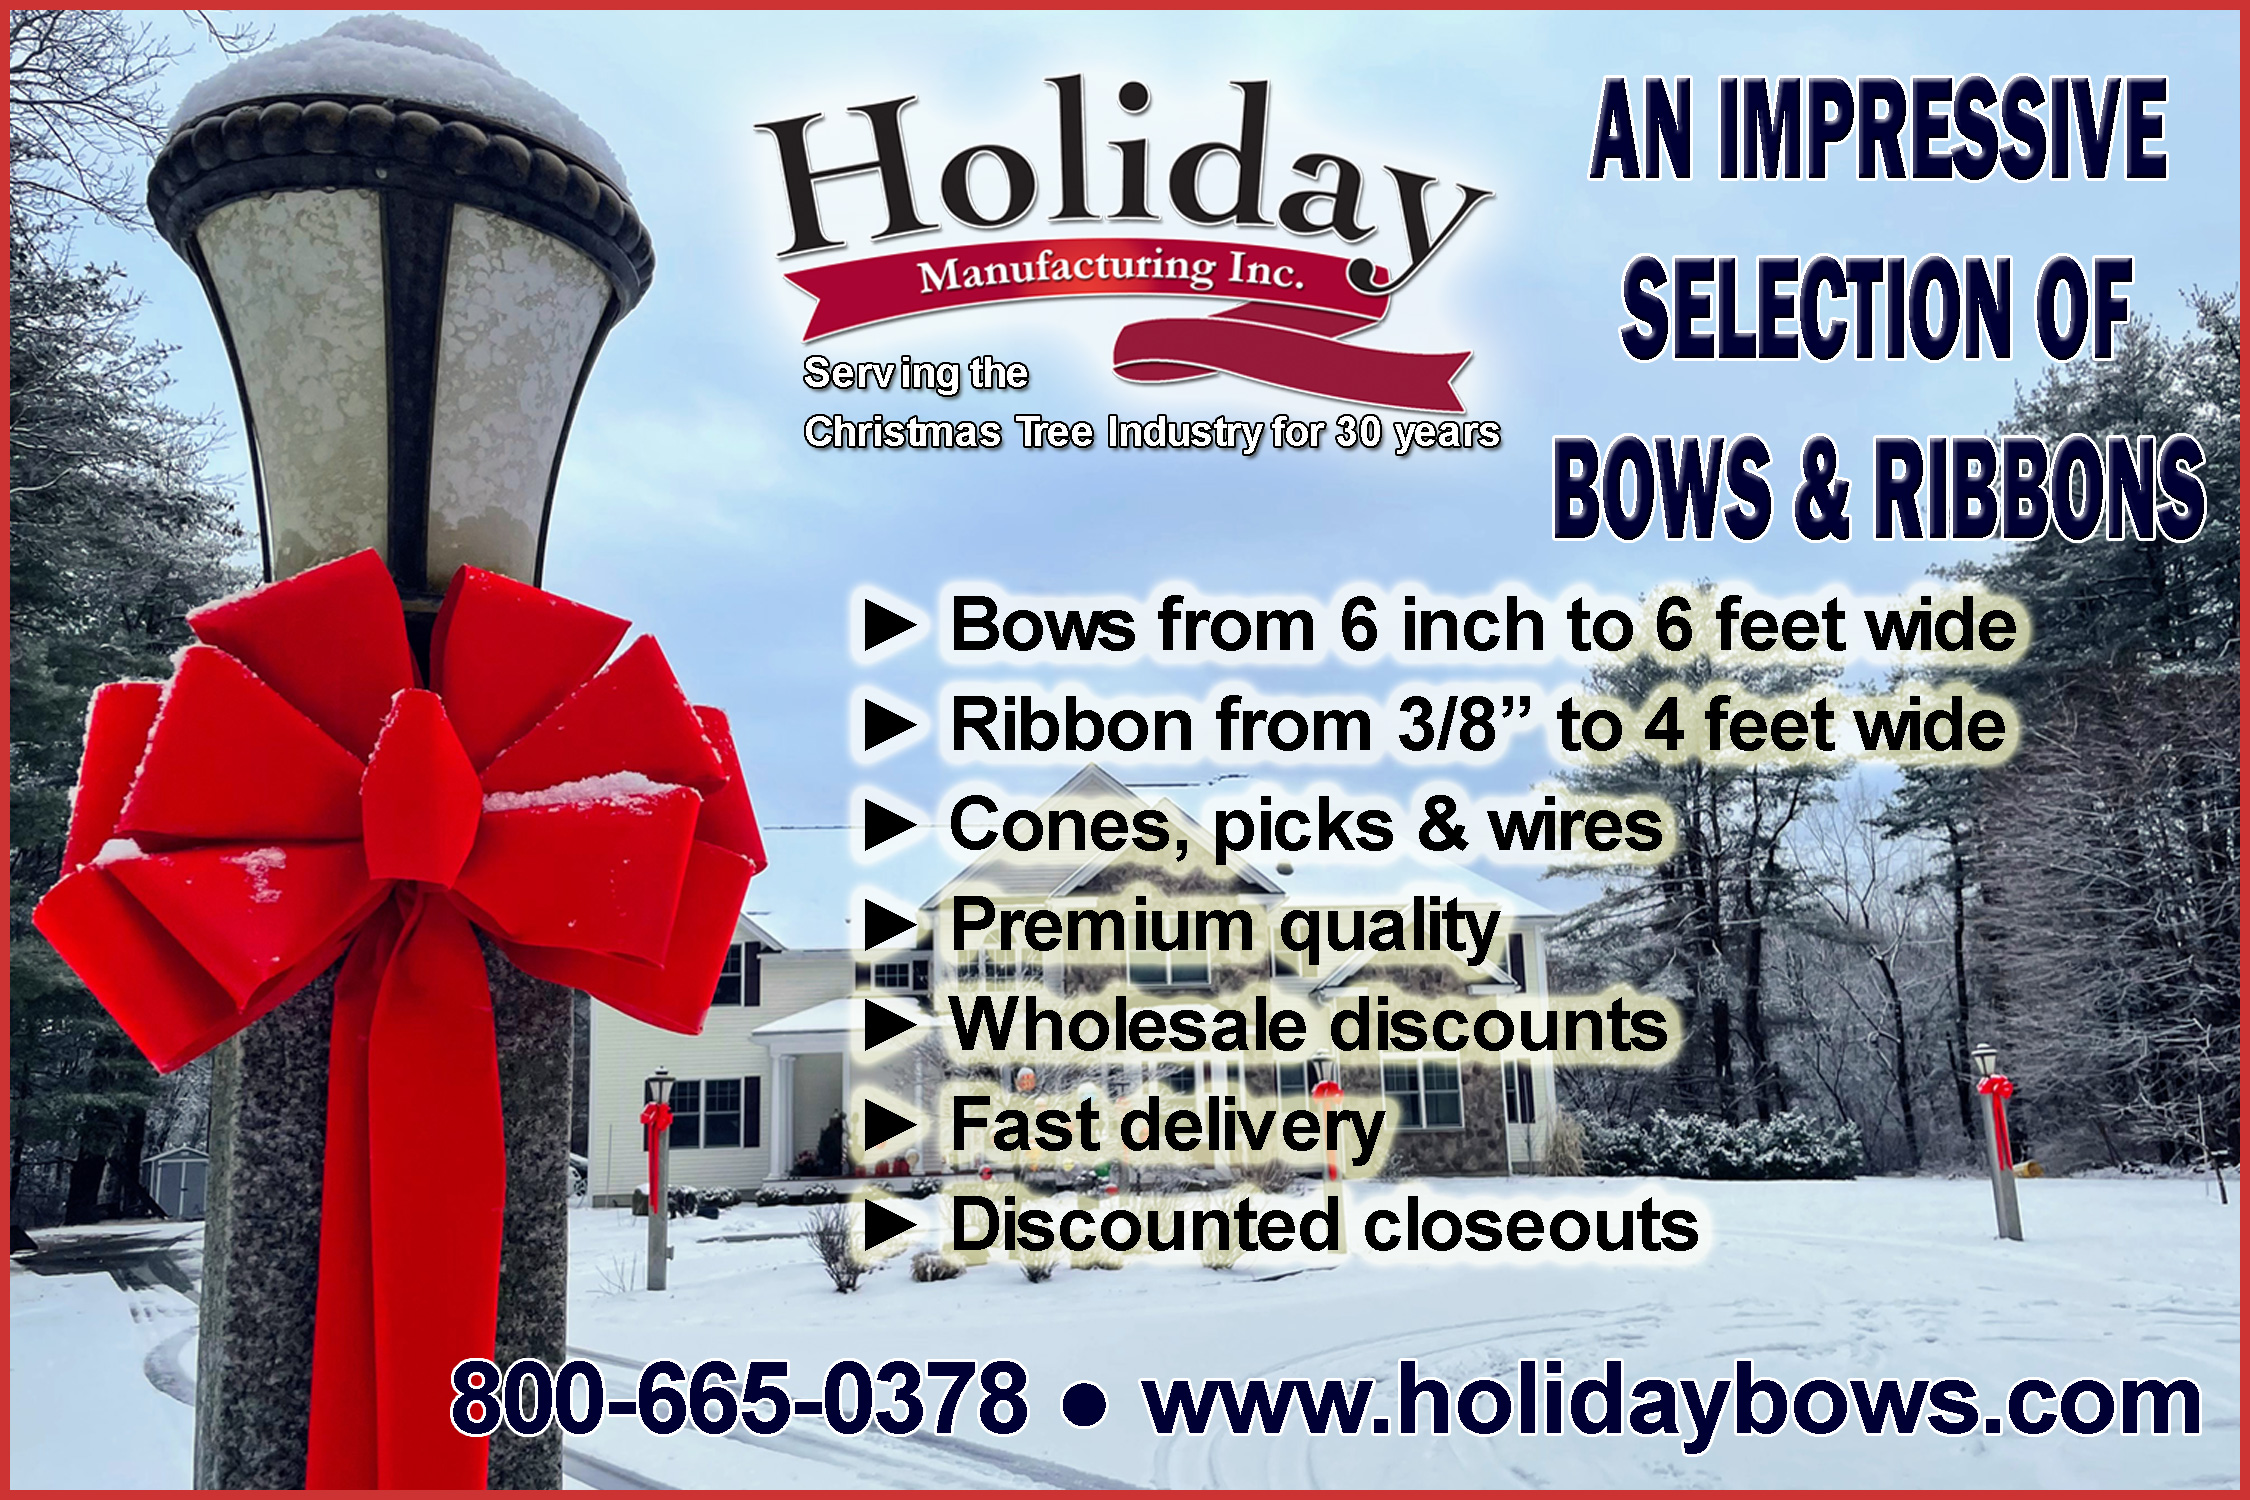 Holiday Manufacturing Inc advertisement